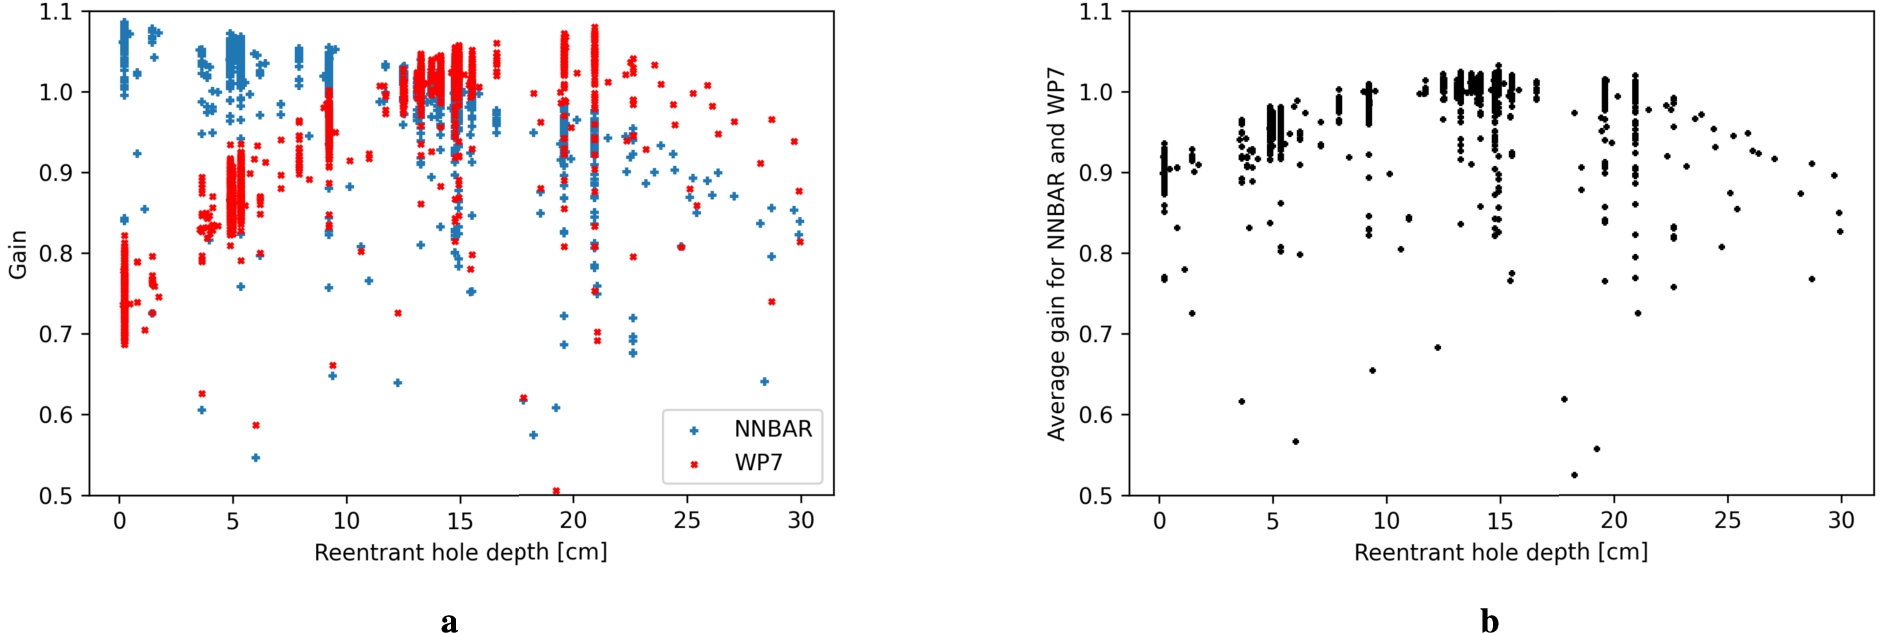 Performance of models with respect to the reentrant-hole depth. (A) gain in NNBAR and WP7 FOM with respect to the baseline model. (B) average gain in NNBAR and WP7 FOM with respect to the baseline model.